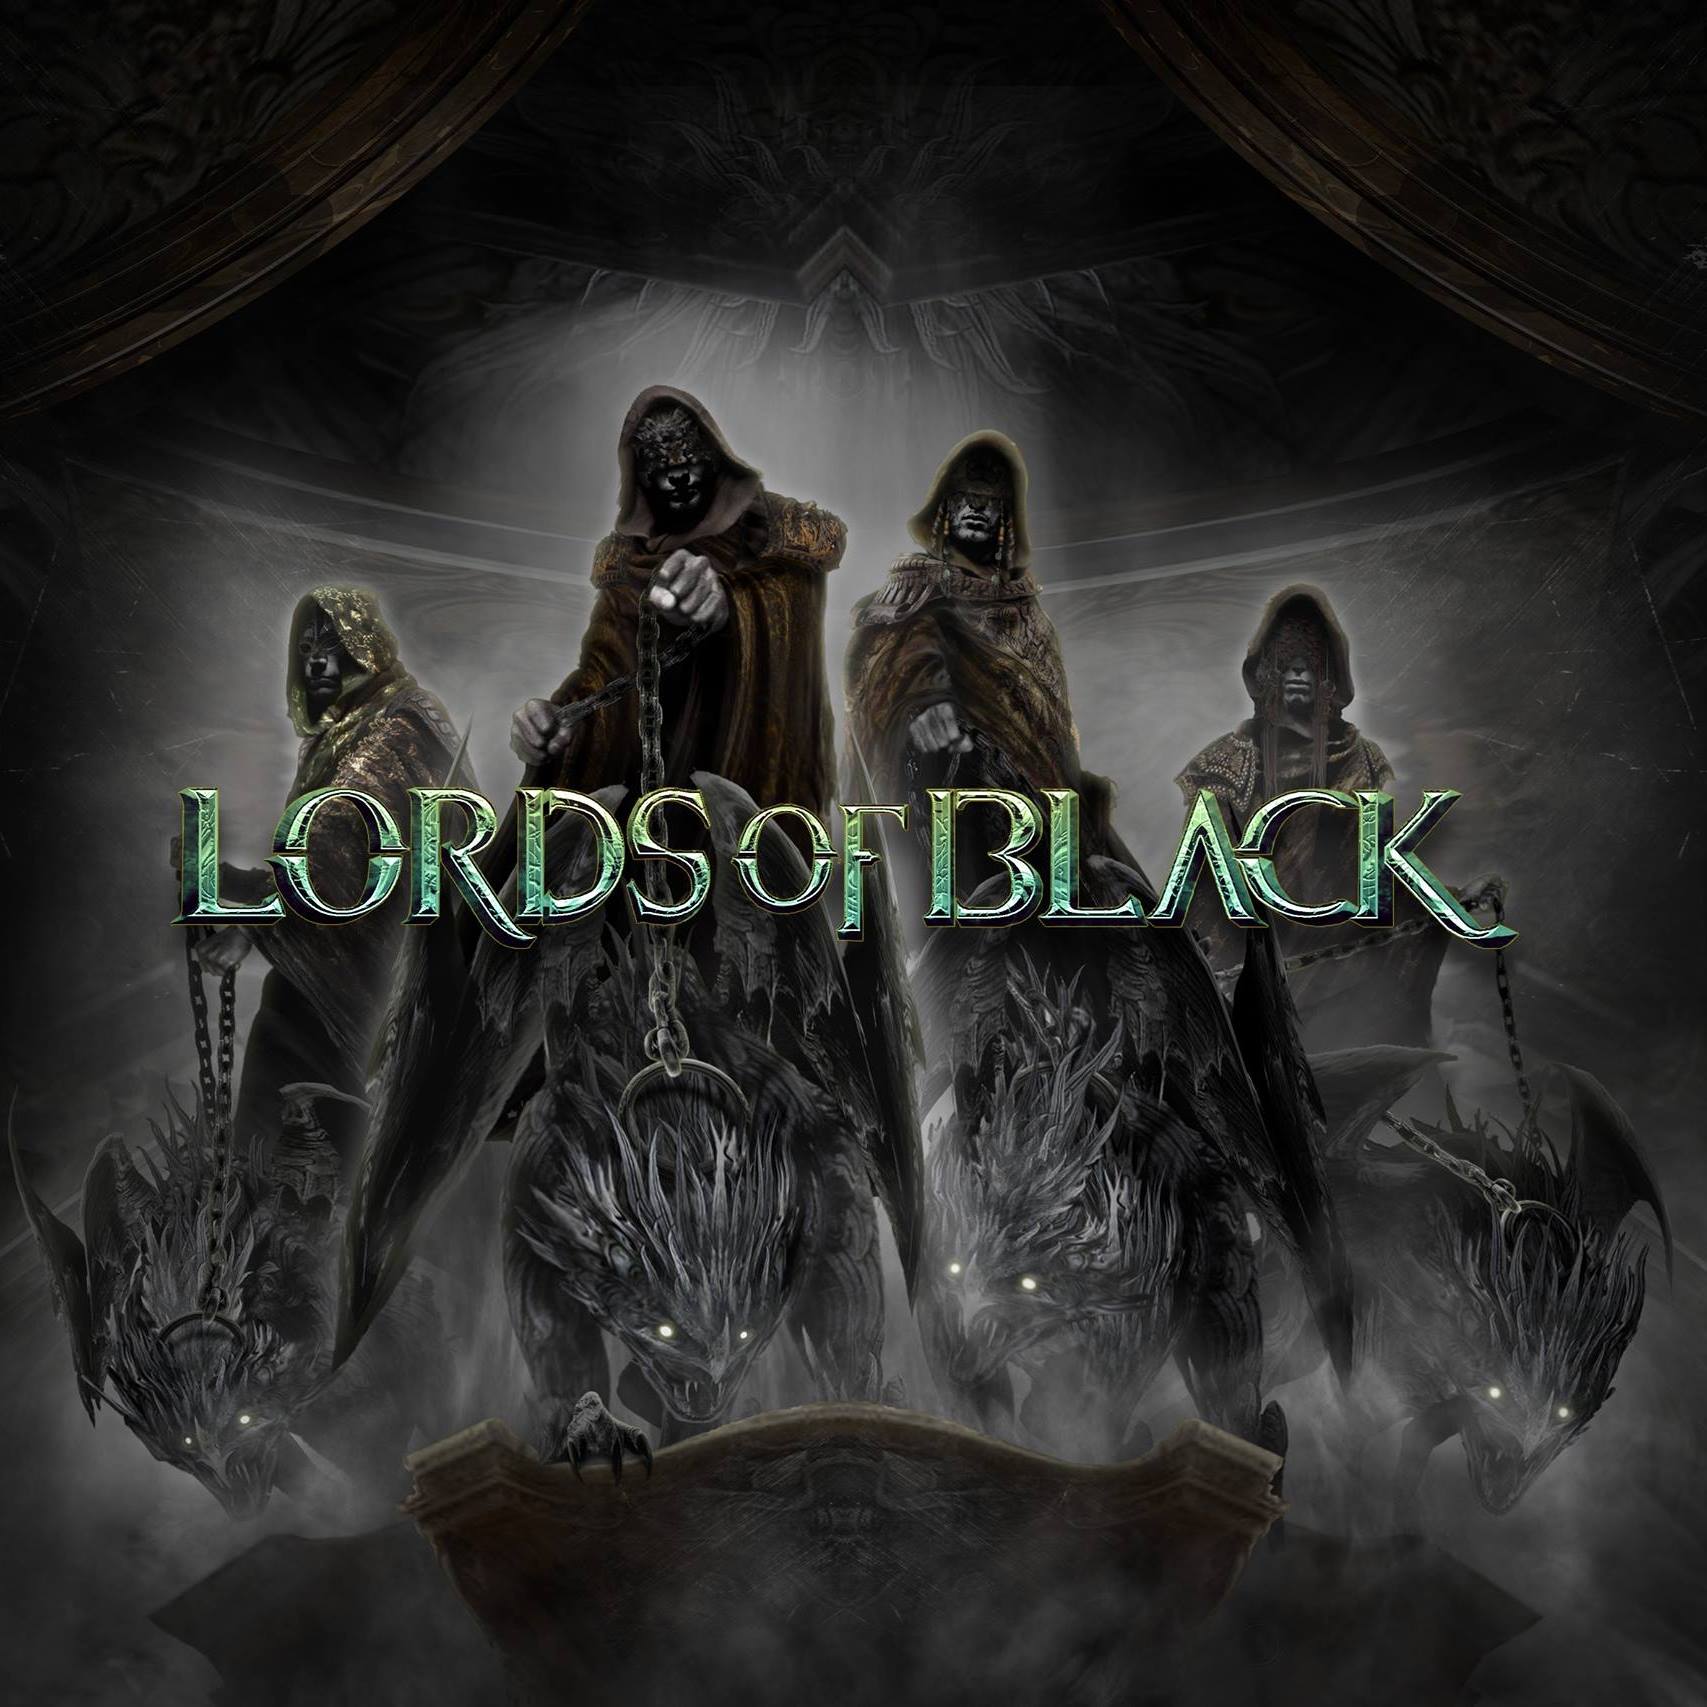 Lords of black mechanics of predacity. Lords of Black группа. Lords of Black 2021. Lords of Black дискография. Lords of Black Alchemy of Souls.